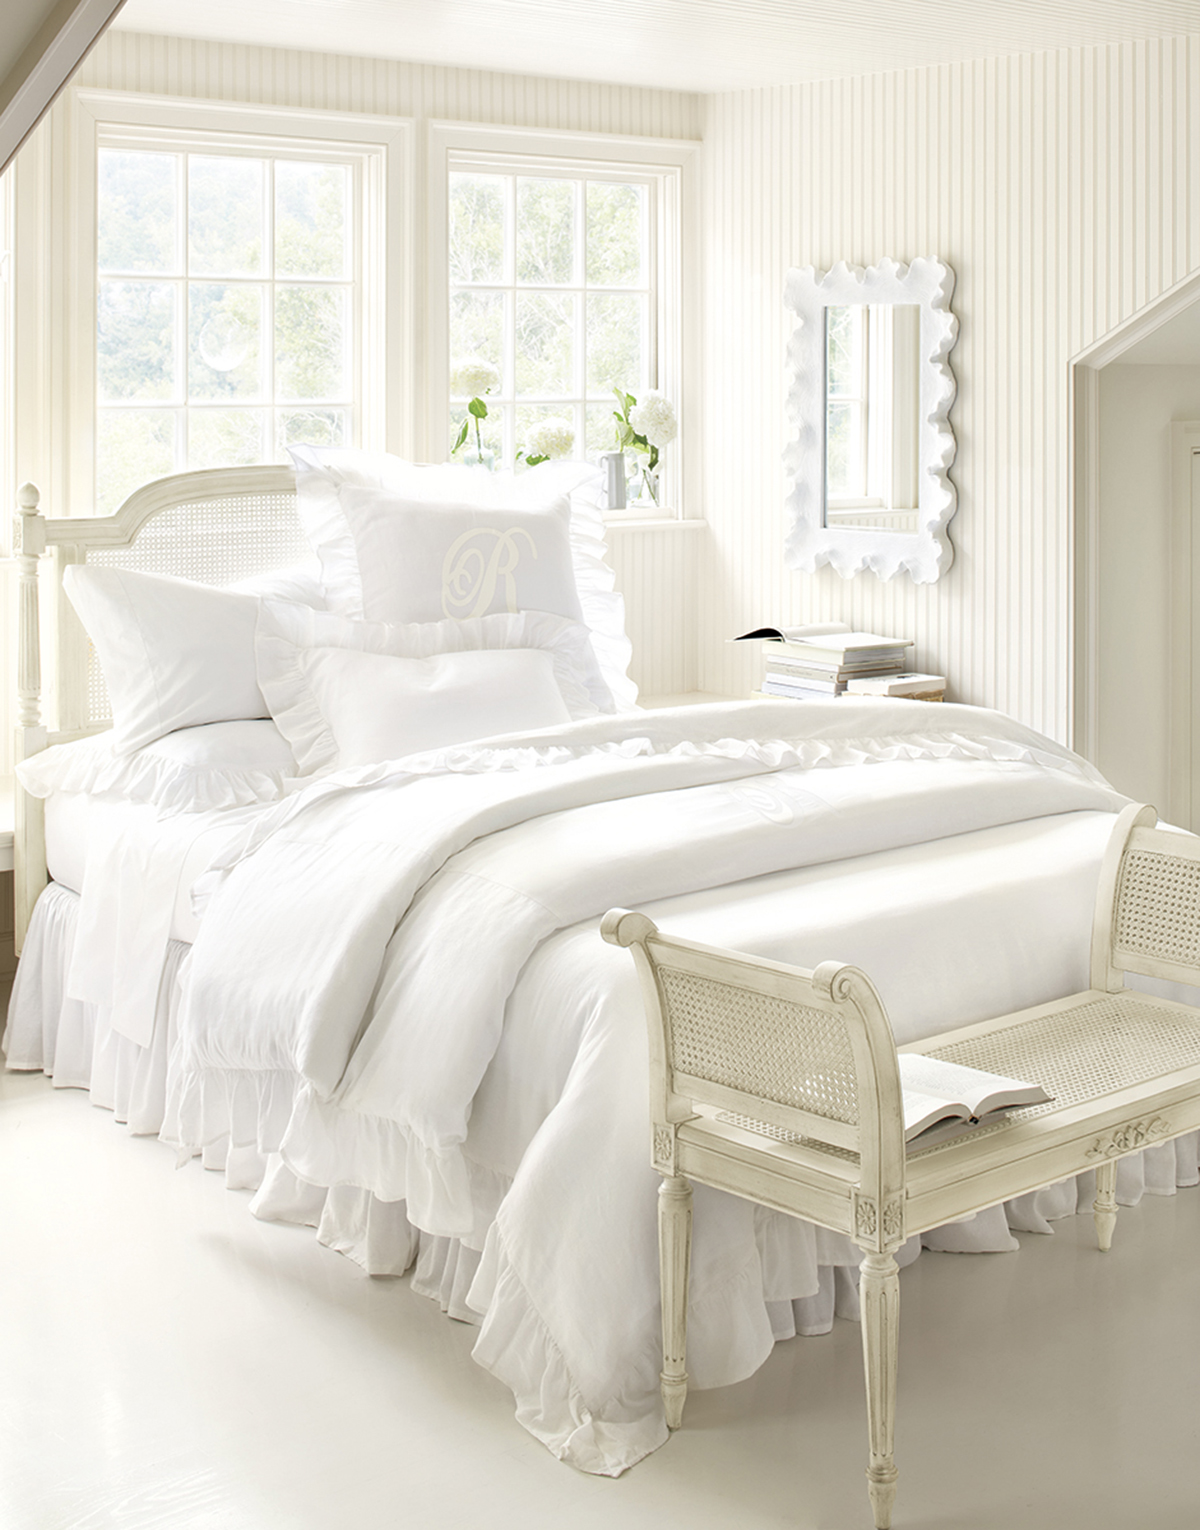 how-to-decorate-an-all-white-bedroom